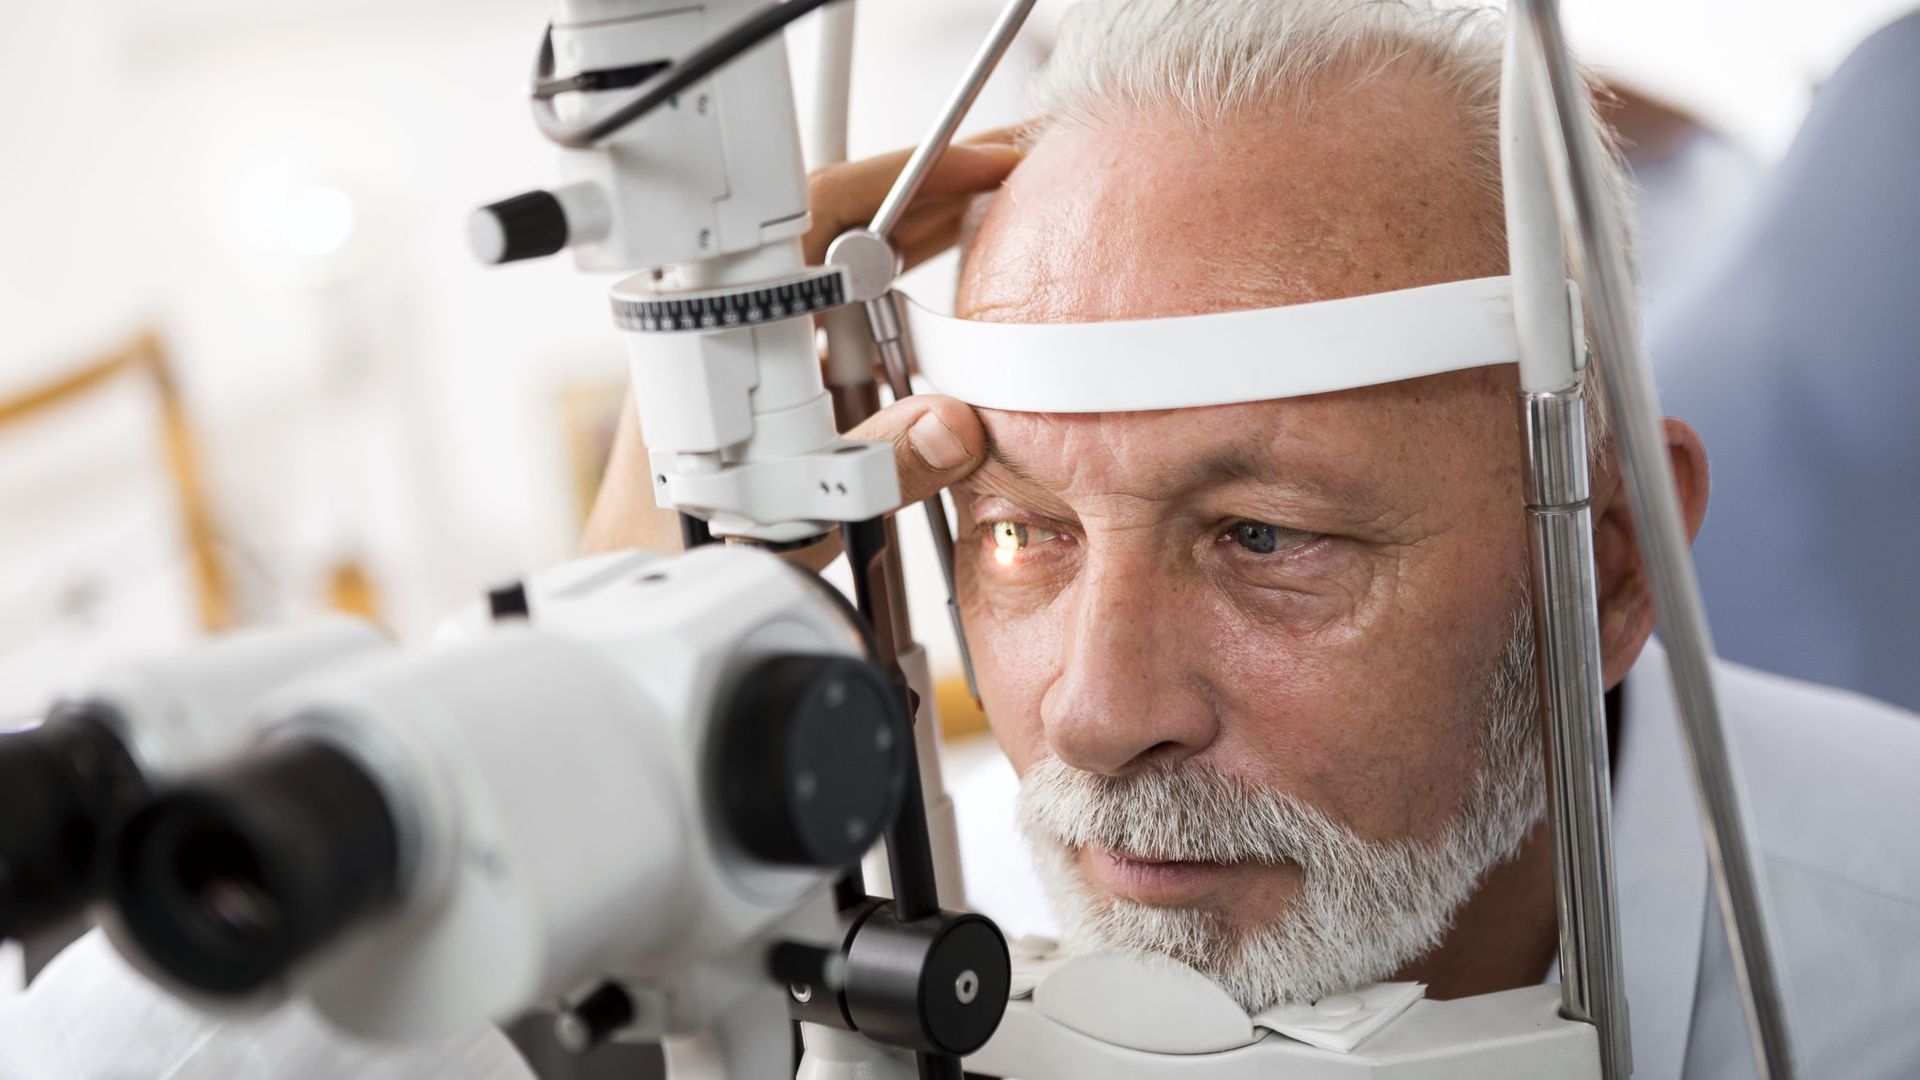 How To Prevent Loss Of Vision If You Are Diabetic